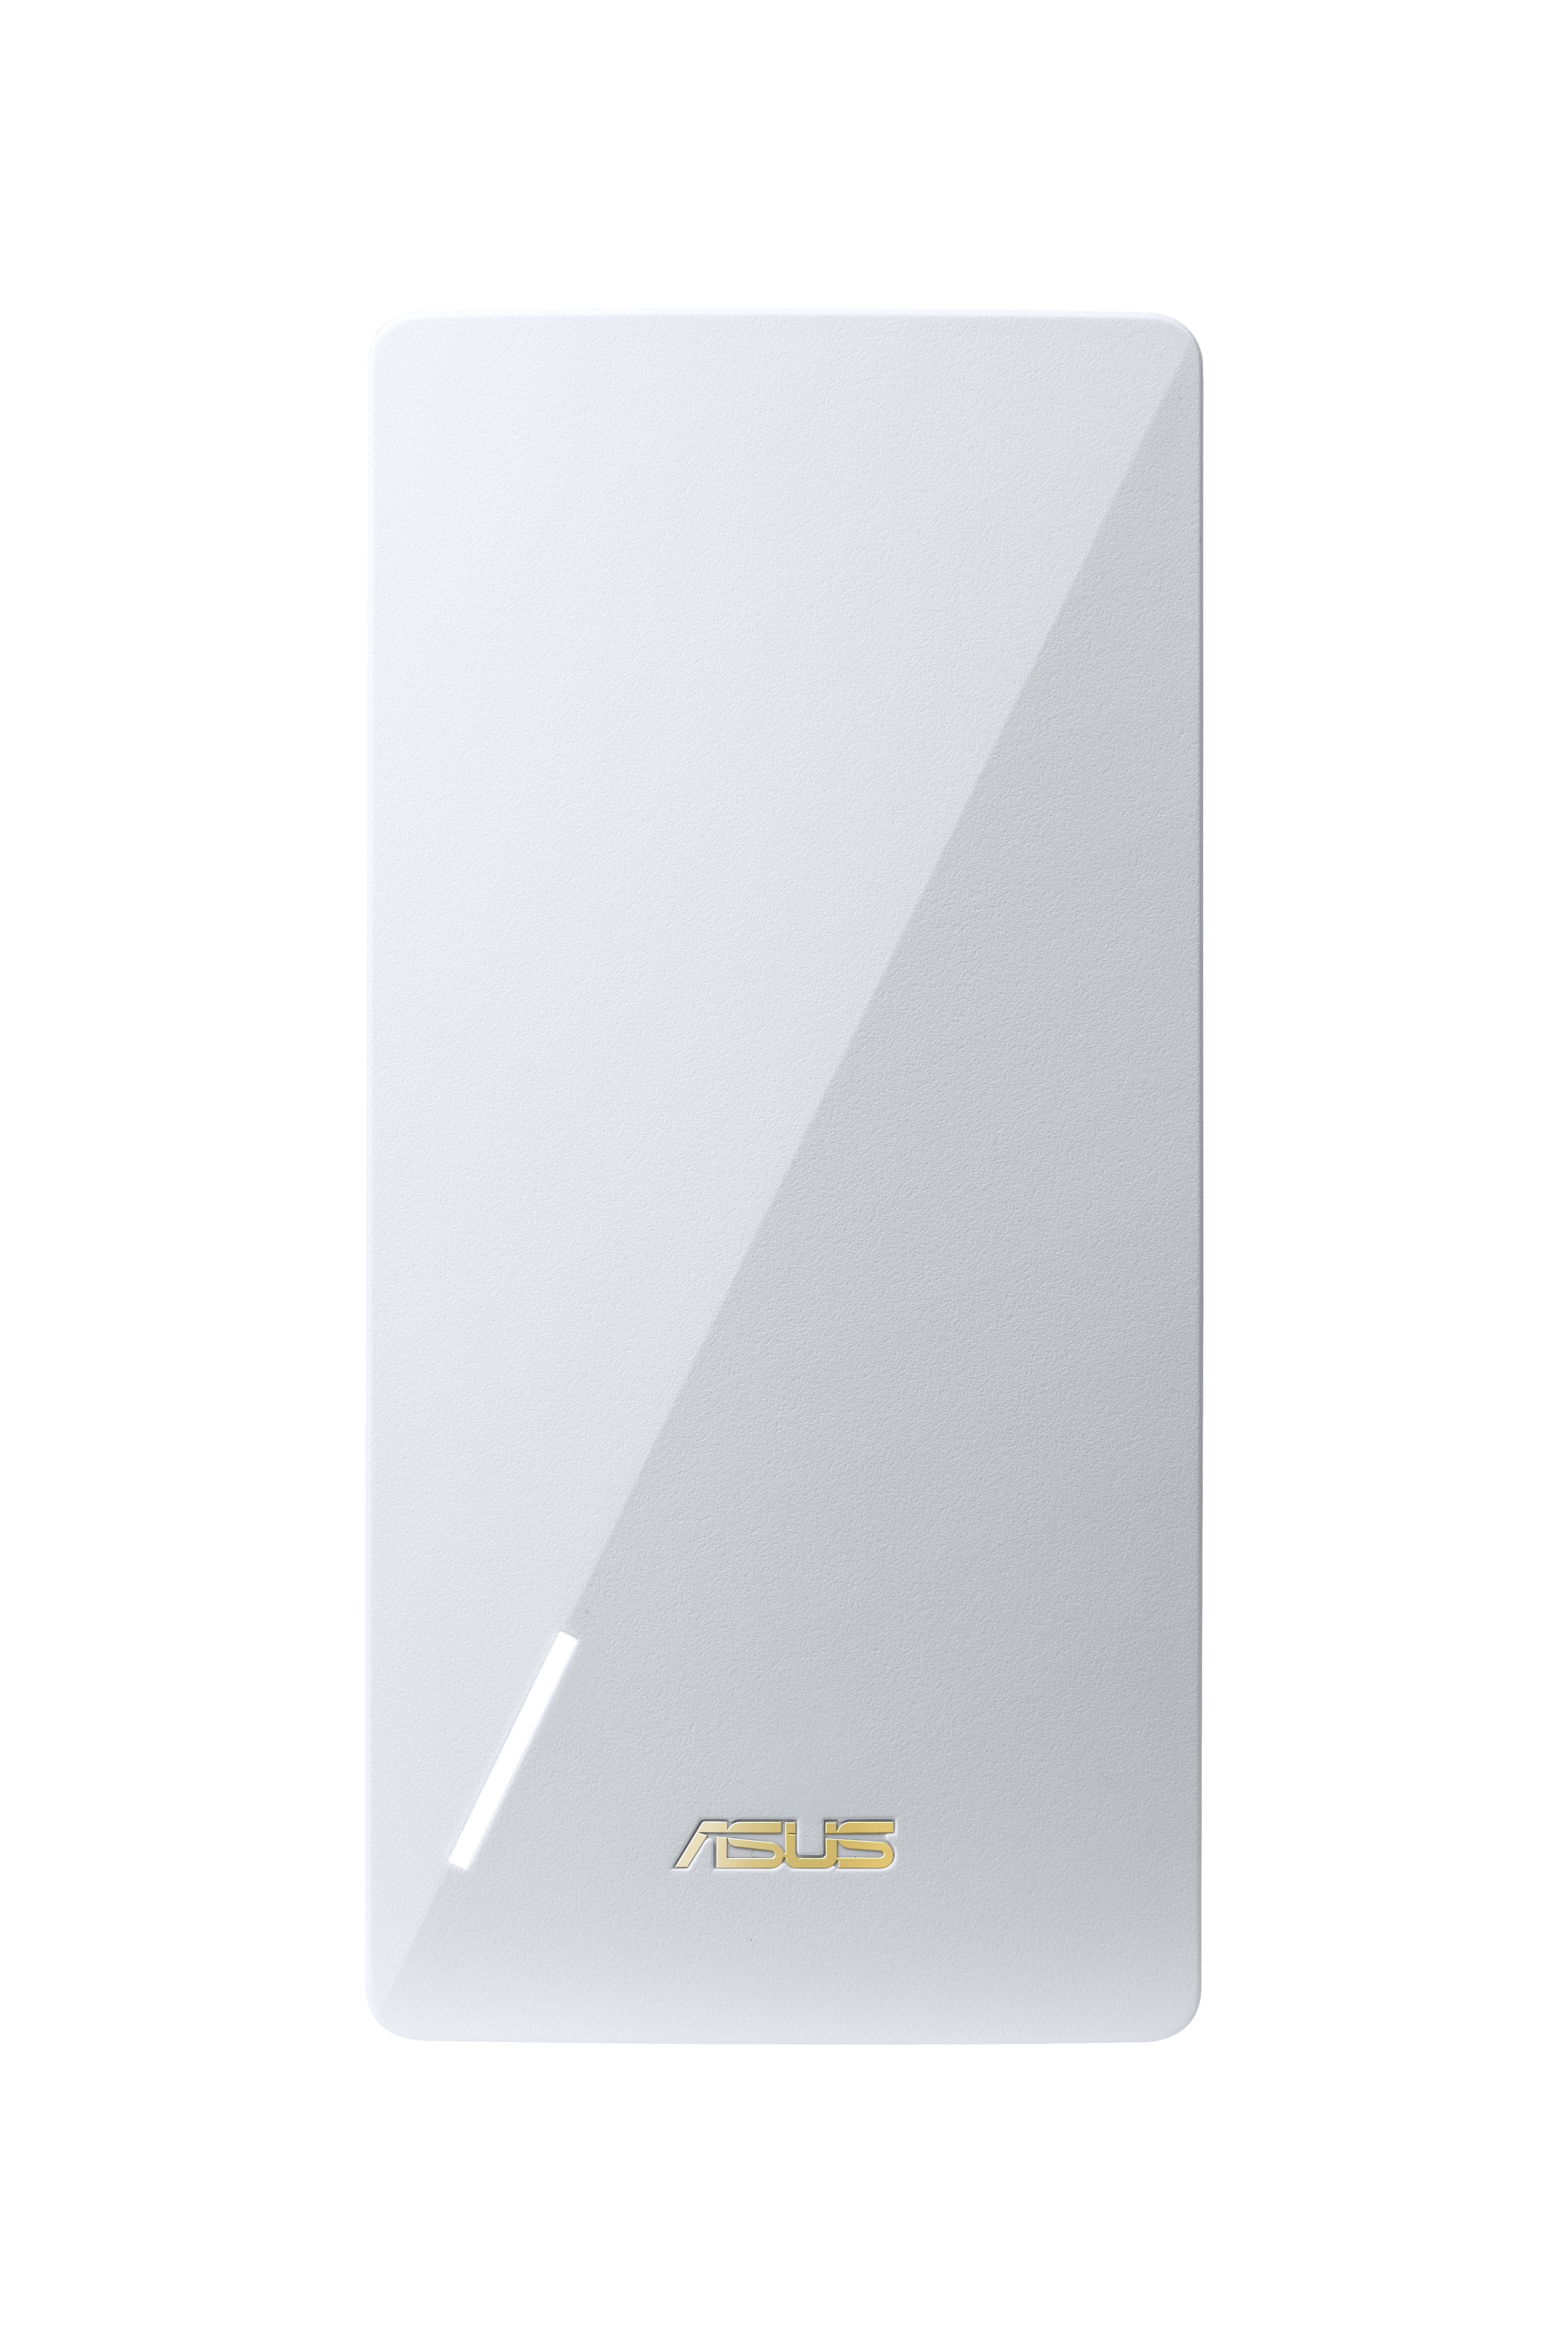 Asus - Repetidor ASUS RP-AX58 Wireless AX3000 WiFi 6